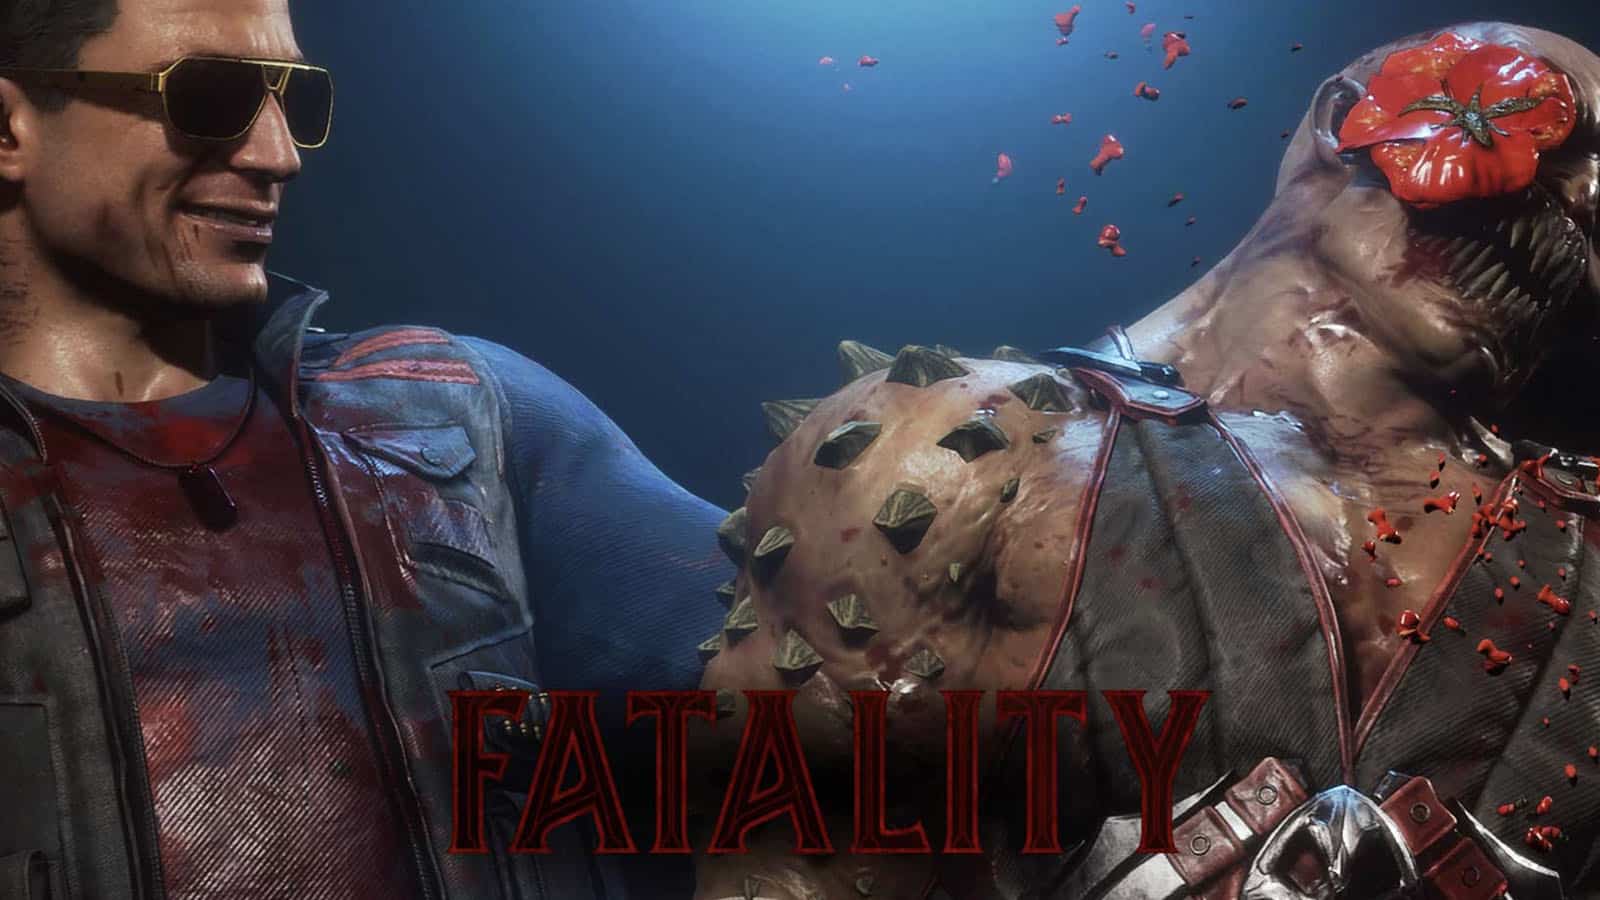 Johnny Cage performing a fatality in Mortal Kombat 11